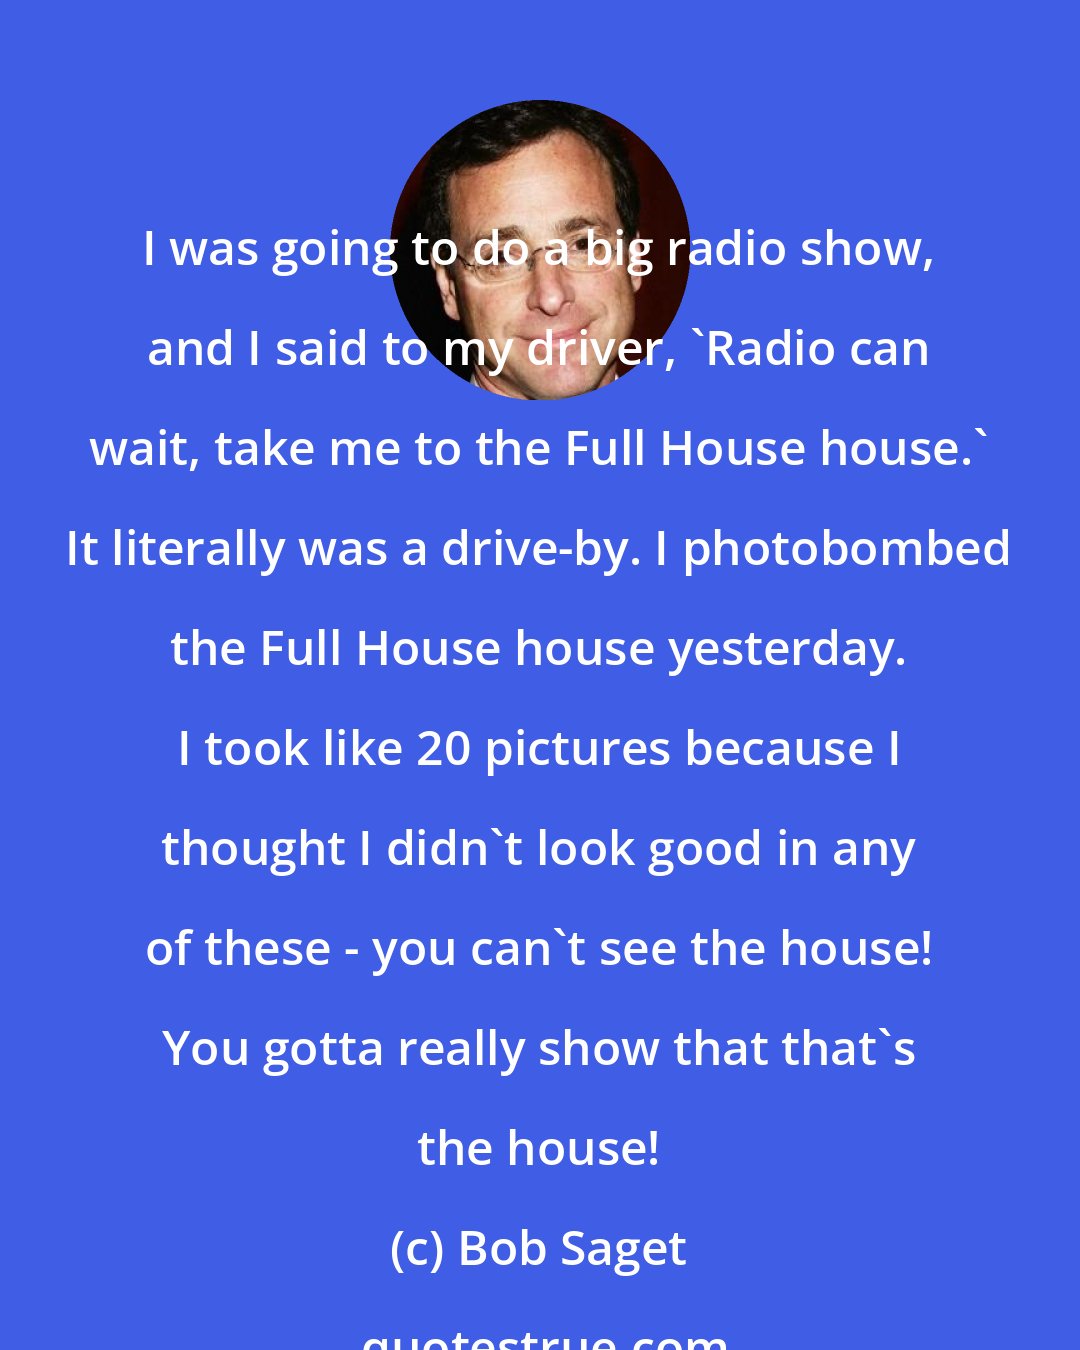 Bob Saget: I was going to do a big radio show, and I said to my driver, 'Radio can wait, take me to the Full House house.' It literally was a drive-by. I photobombed the Full House house yesterday. I took like 20 pictures because I thought I didn't look good in any of these - you can't see the house! You gotta really show that that's the house!